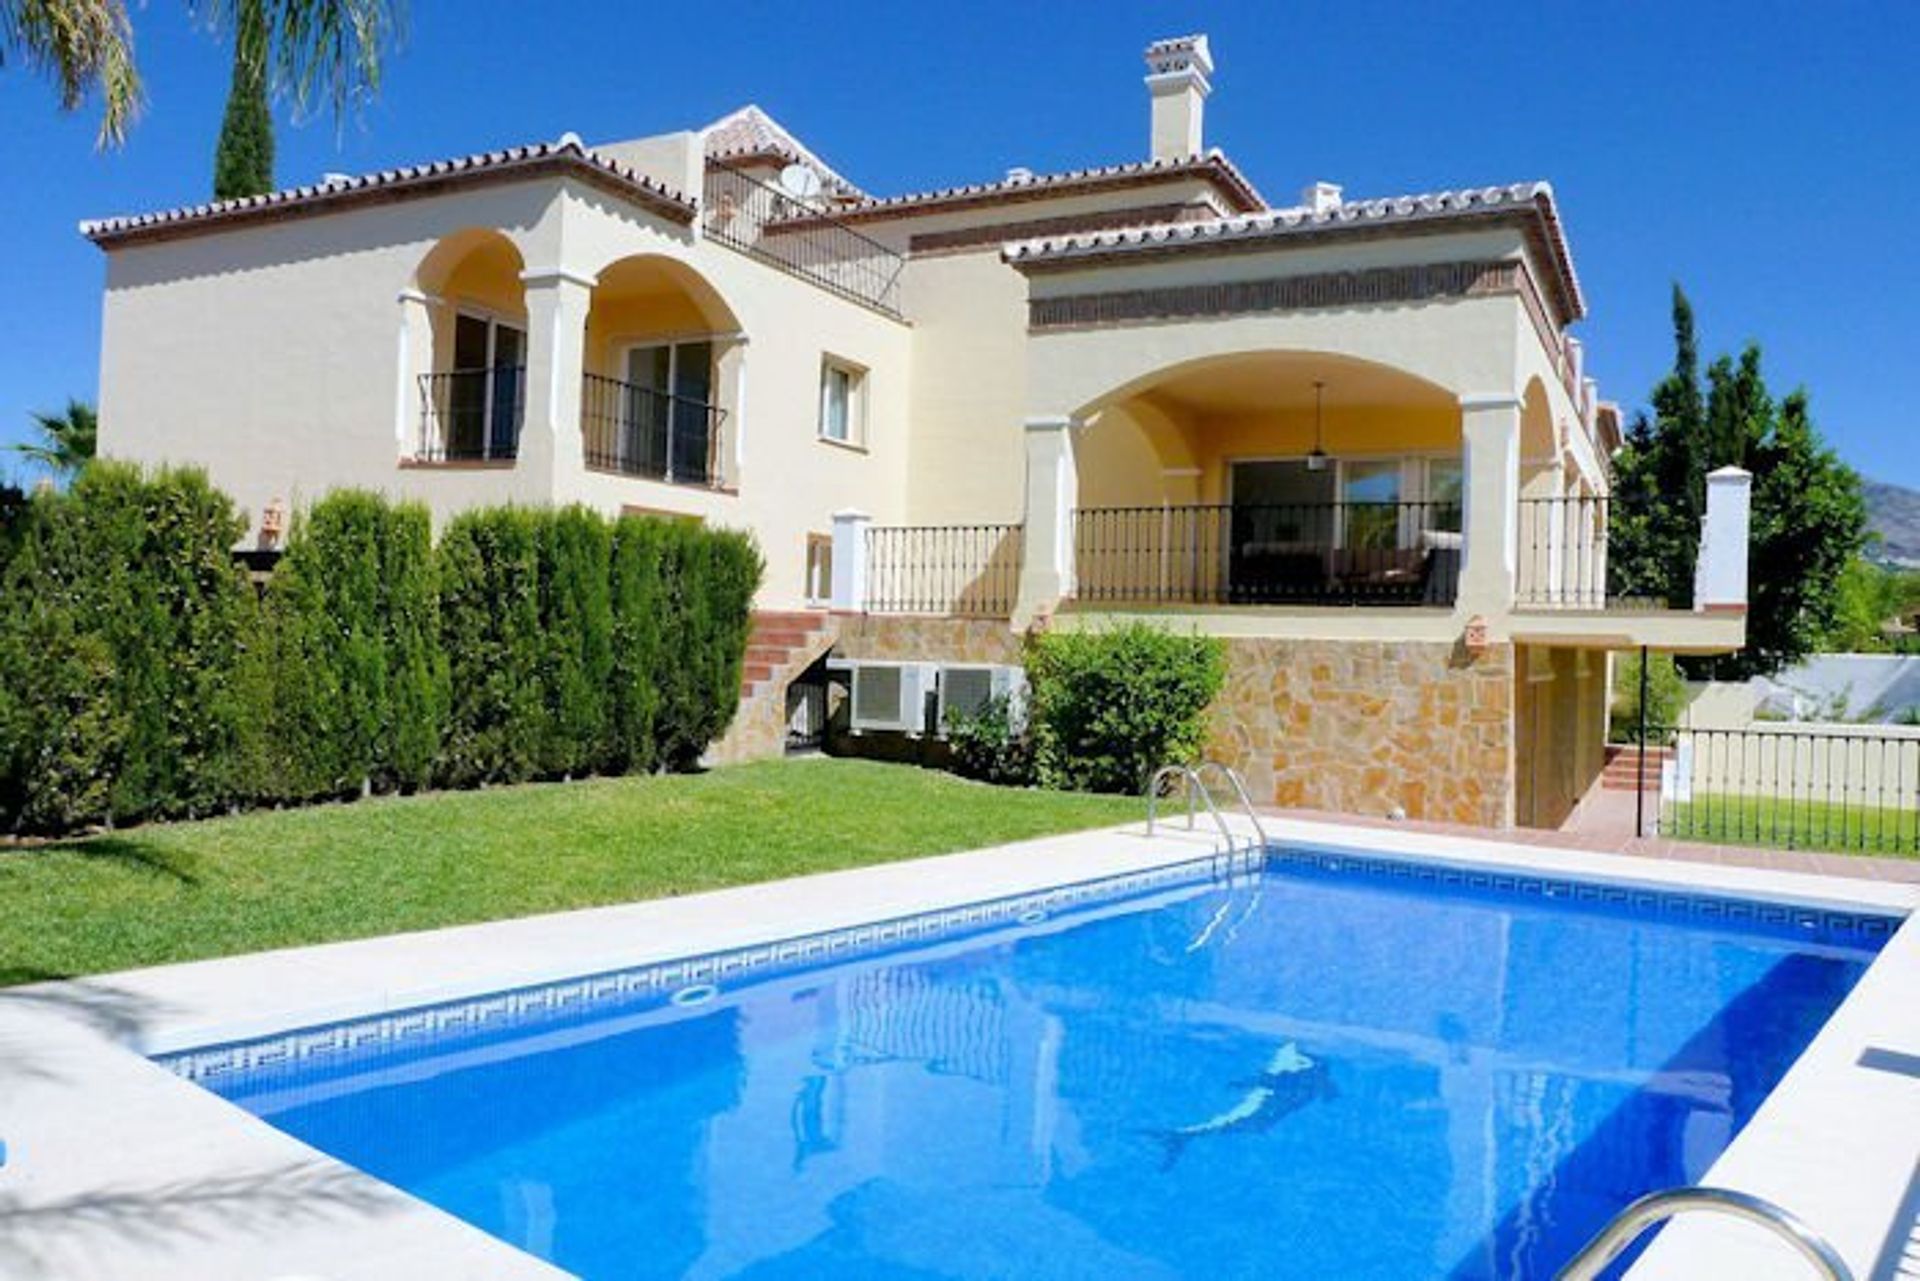 Enjoy your holiday in Mijas Golf with our properties with private pools